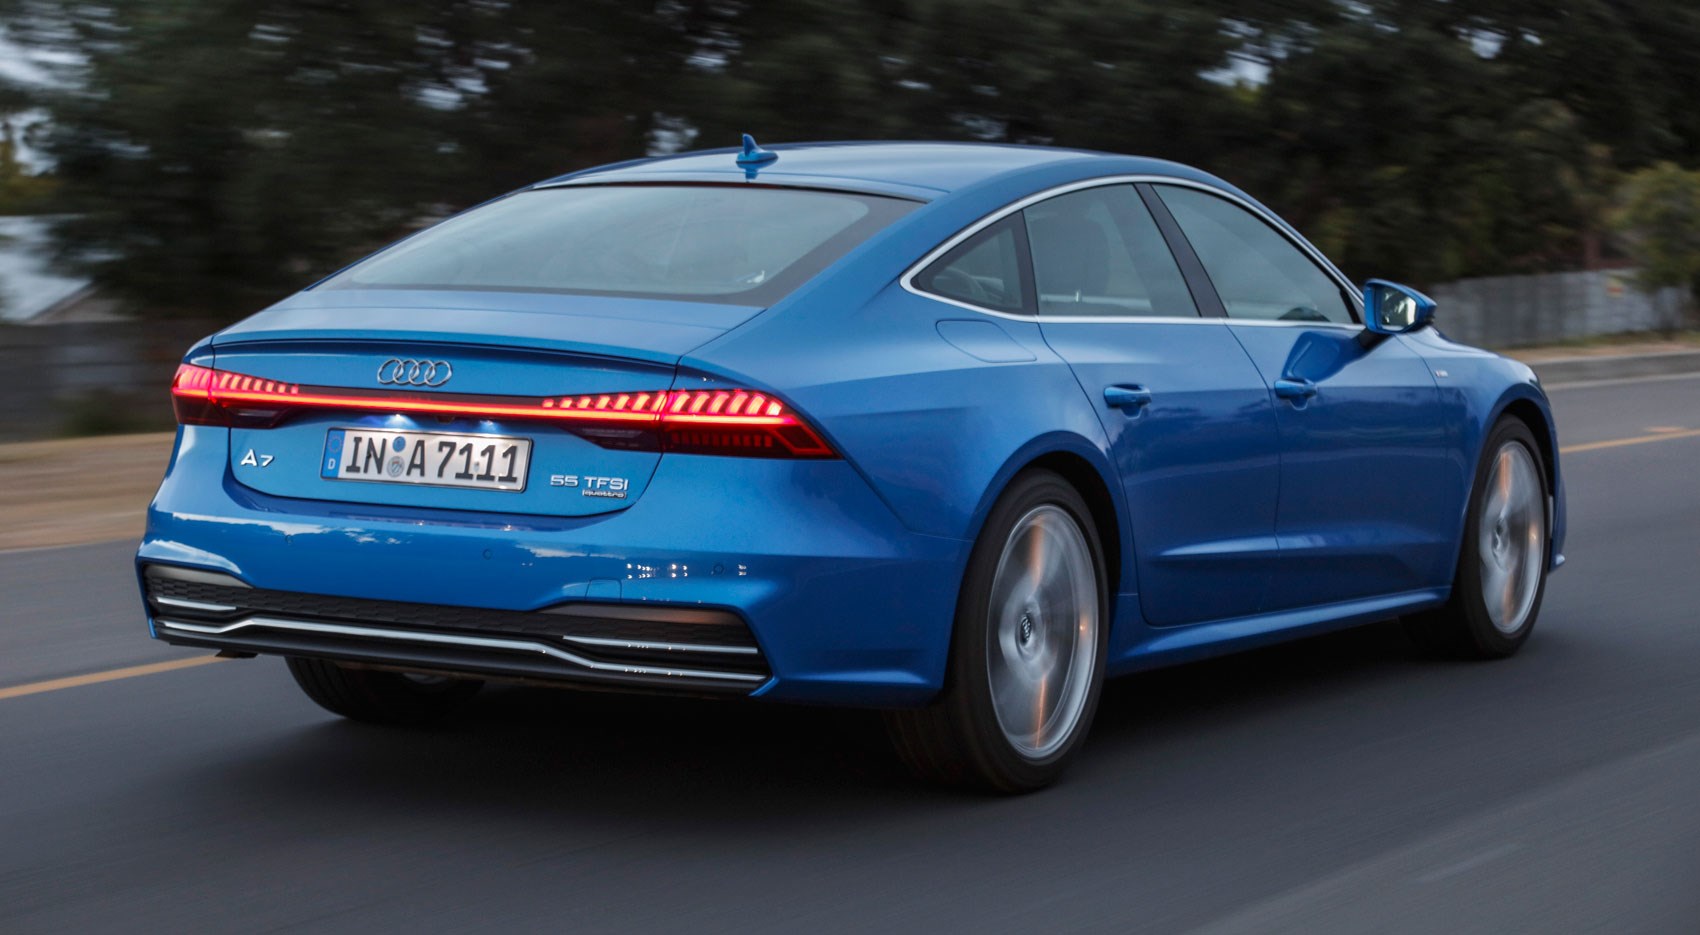 Audi A7 rear tracking